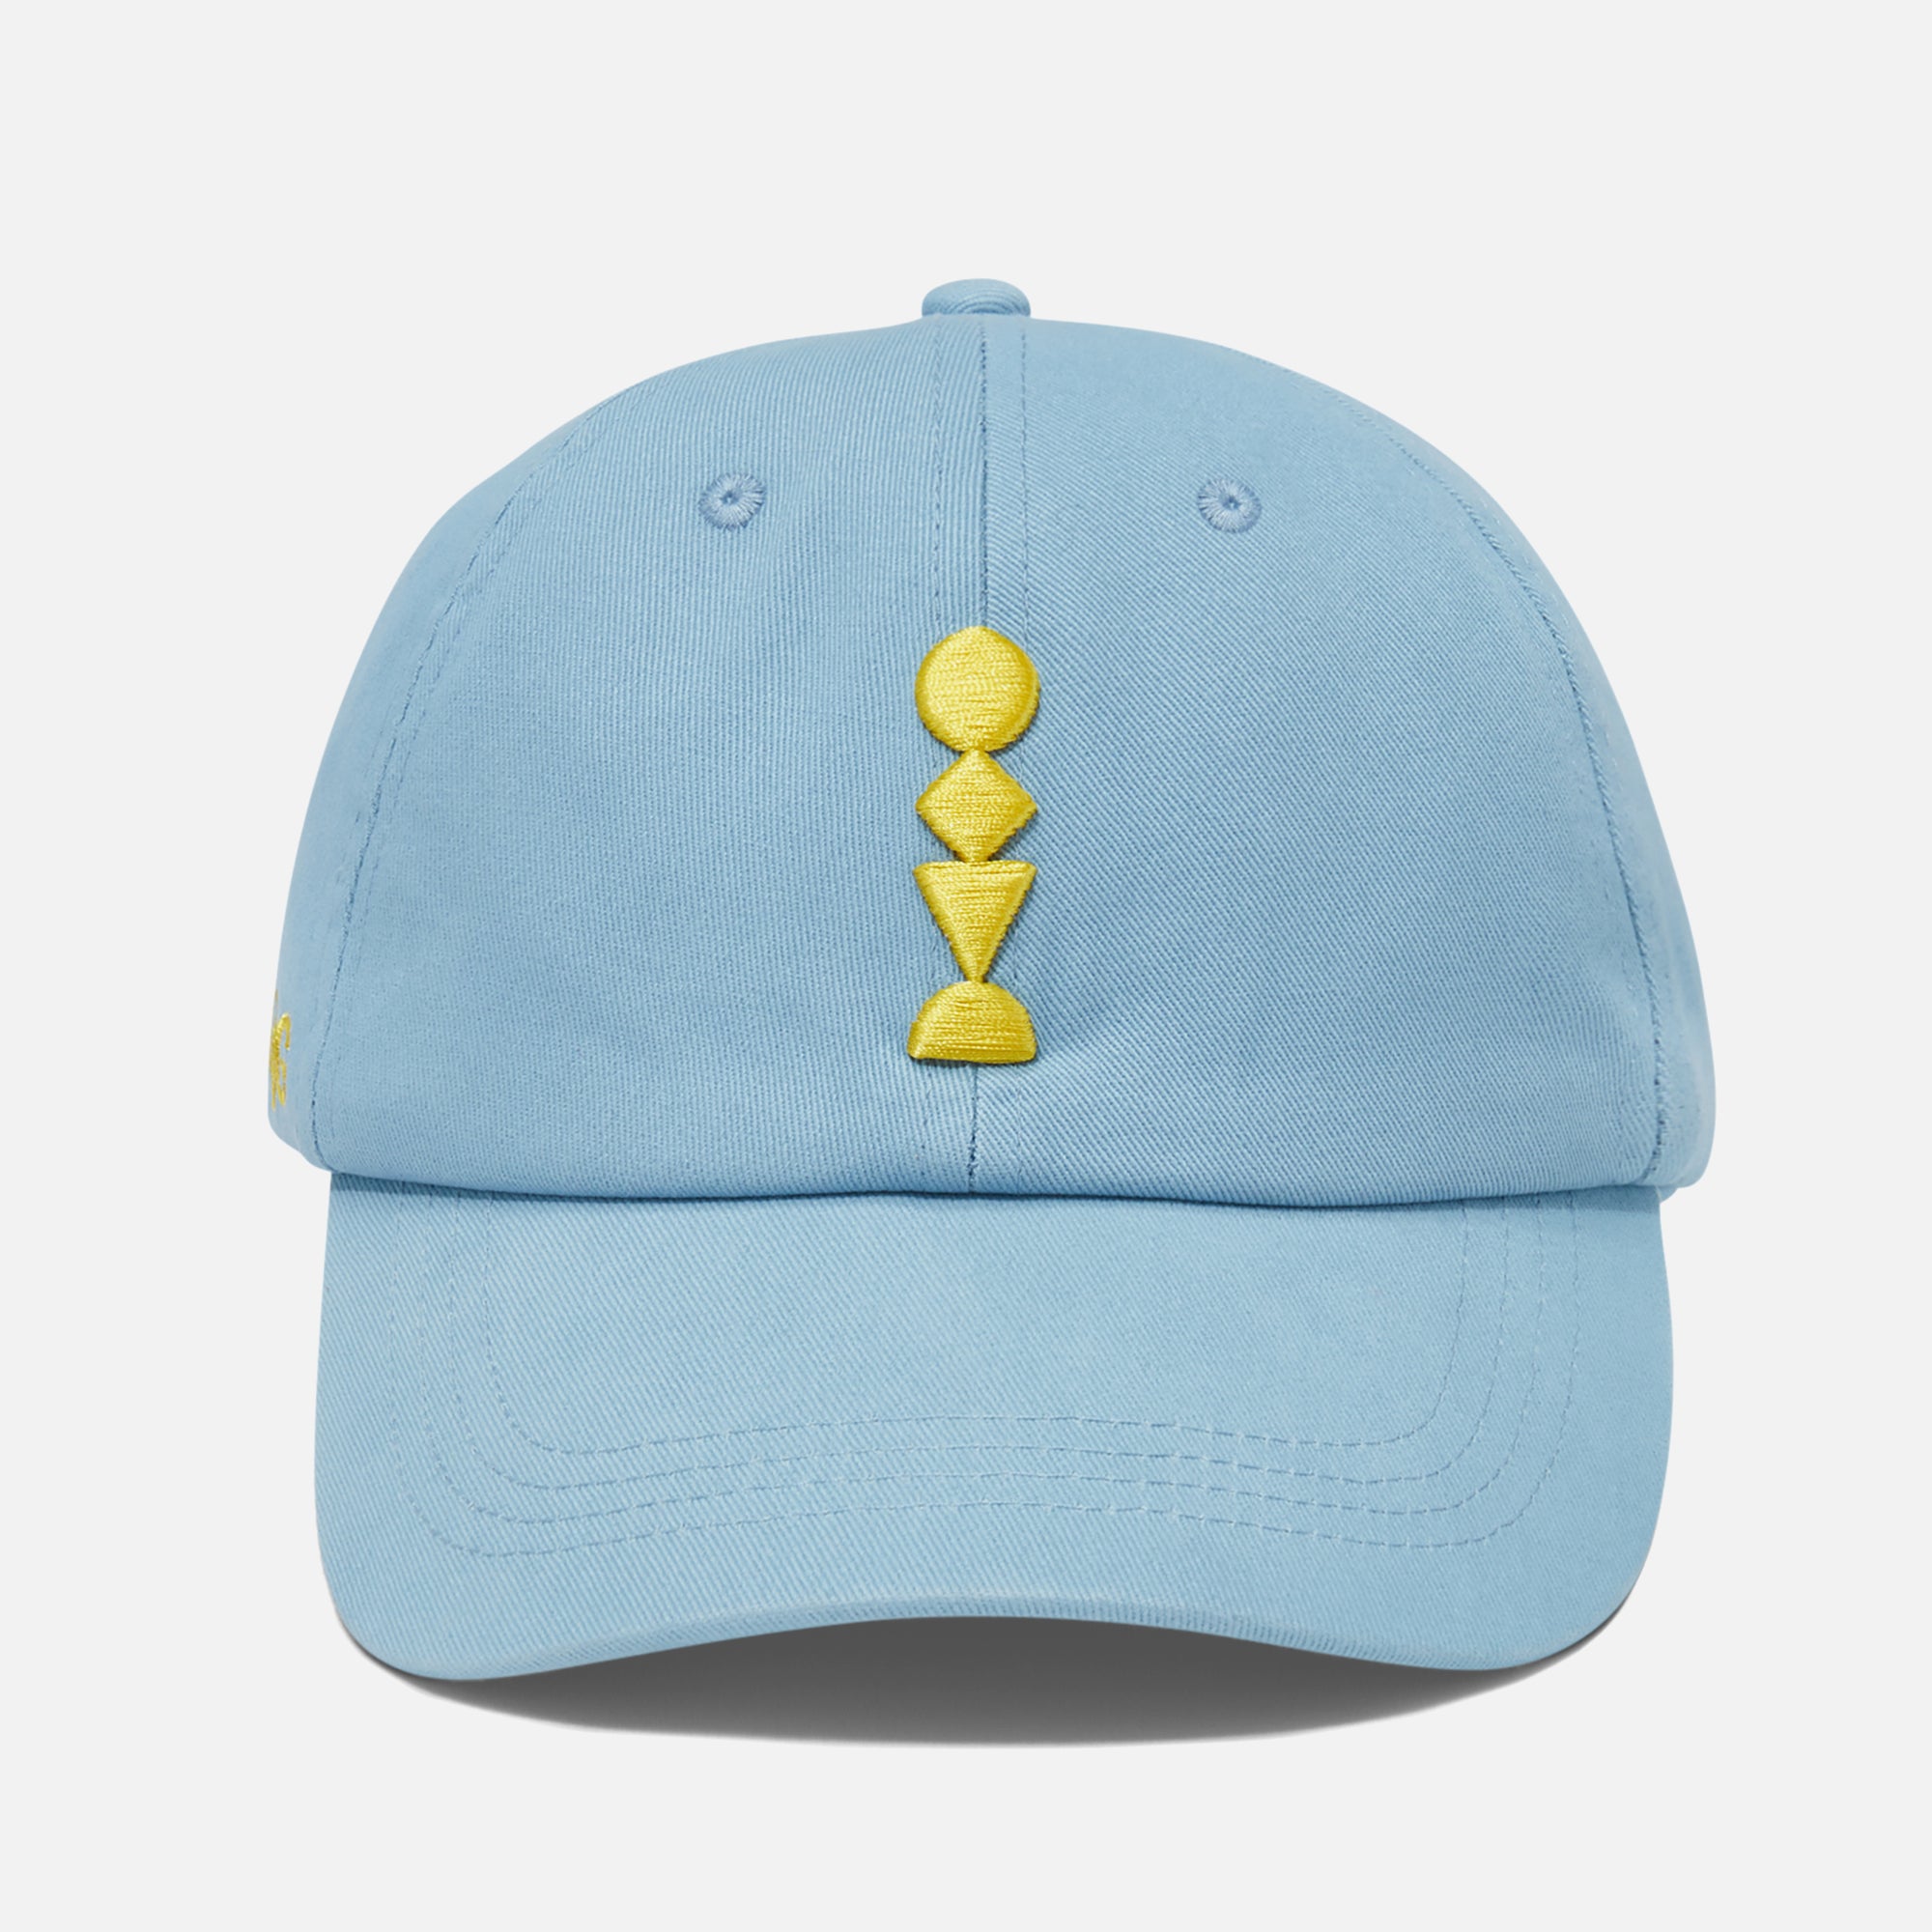 Blue Baseball Cap with a Yellow Embroidered Design on a White Background